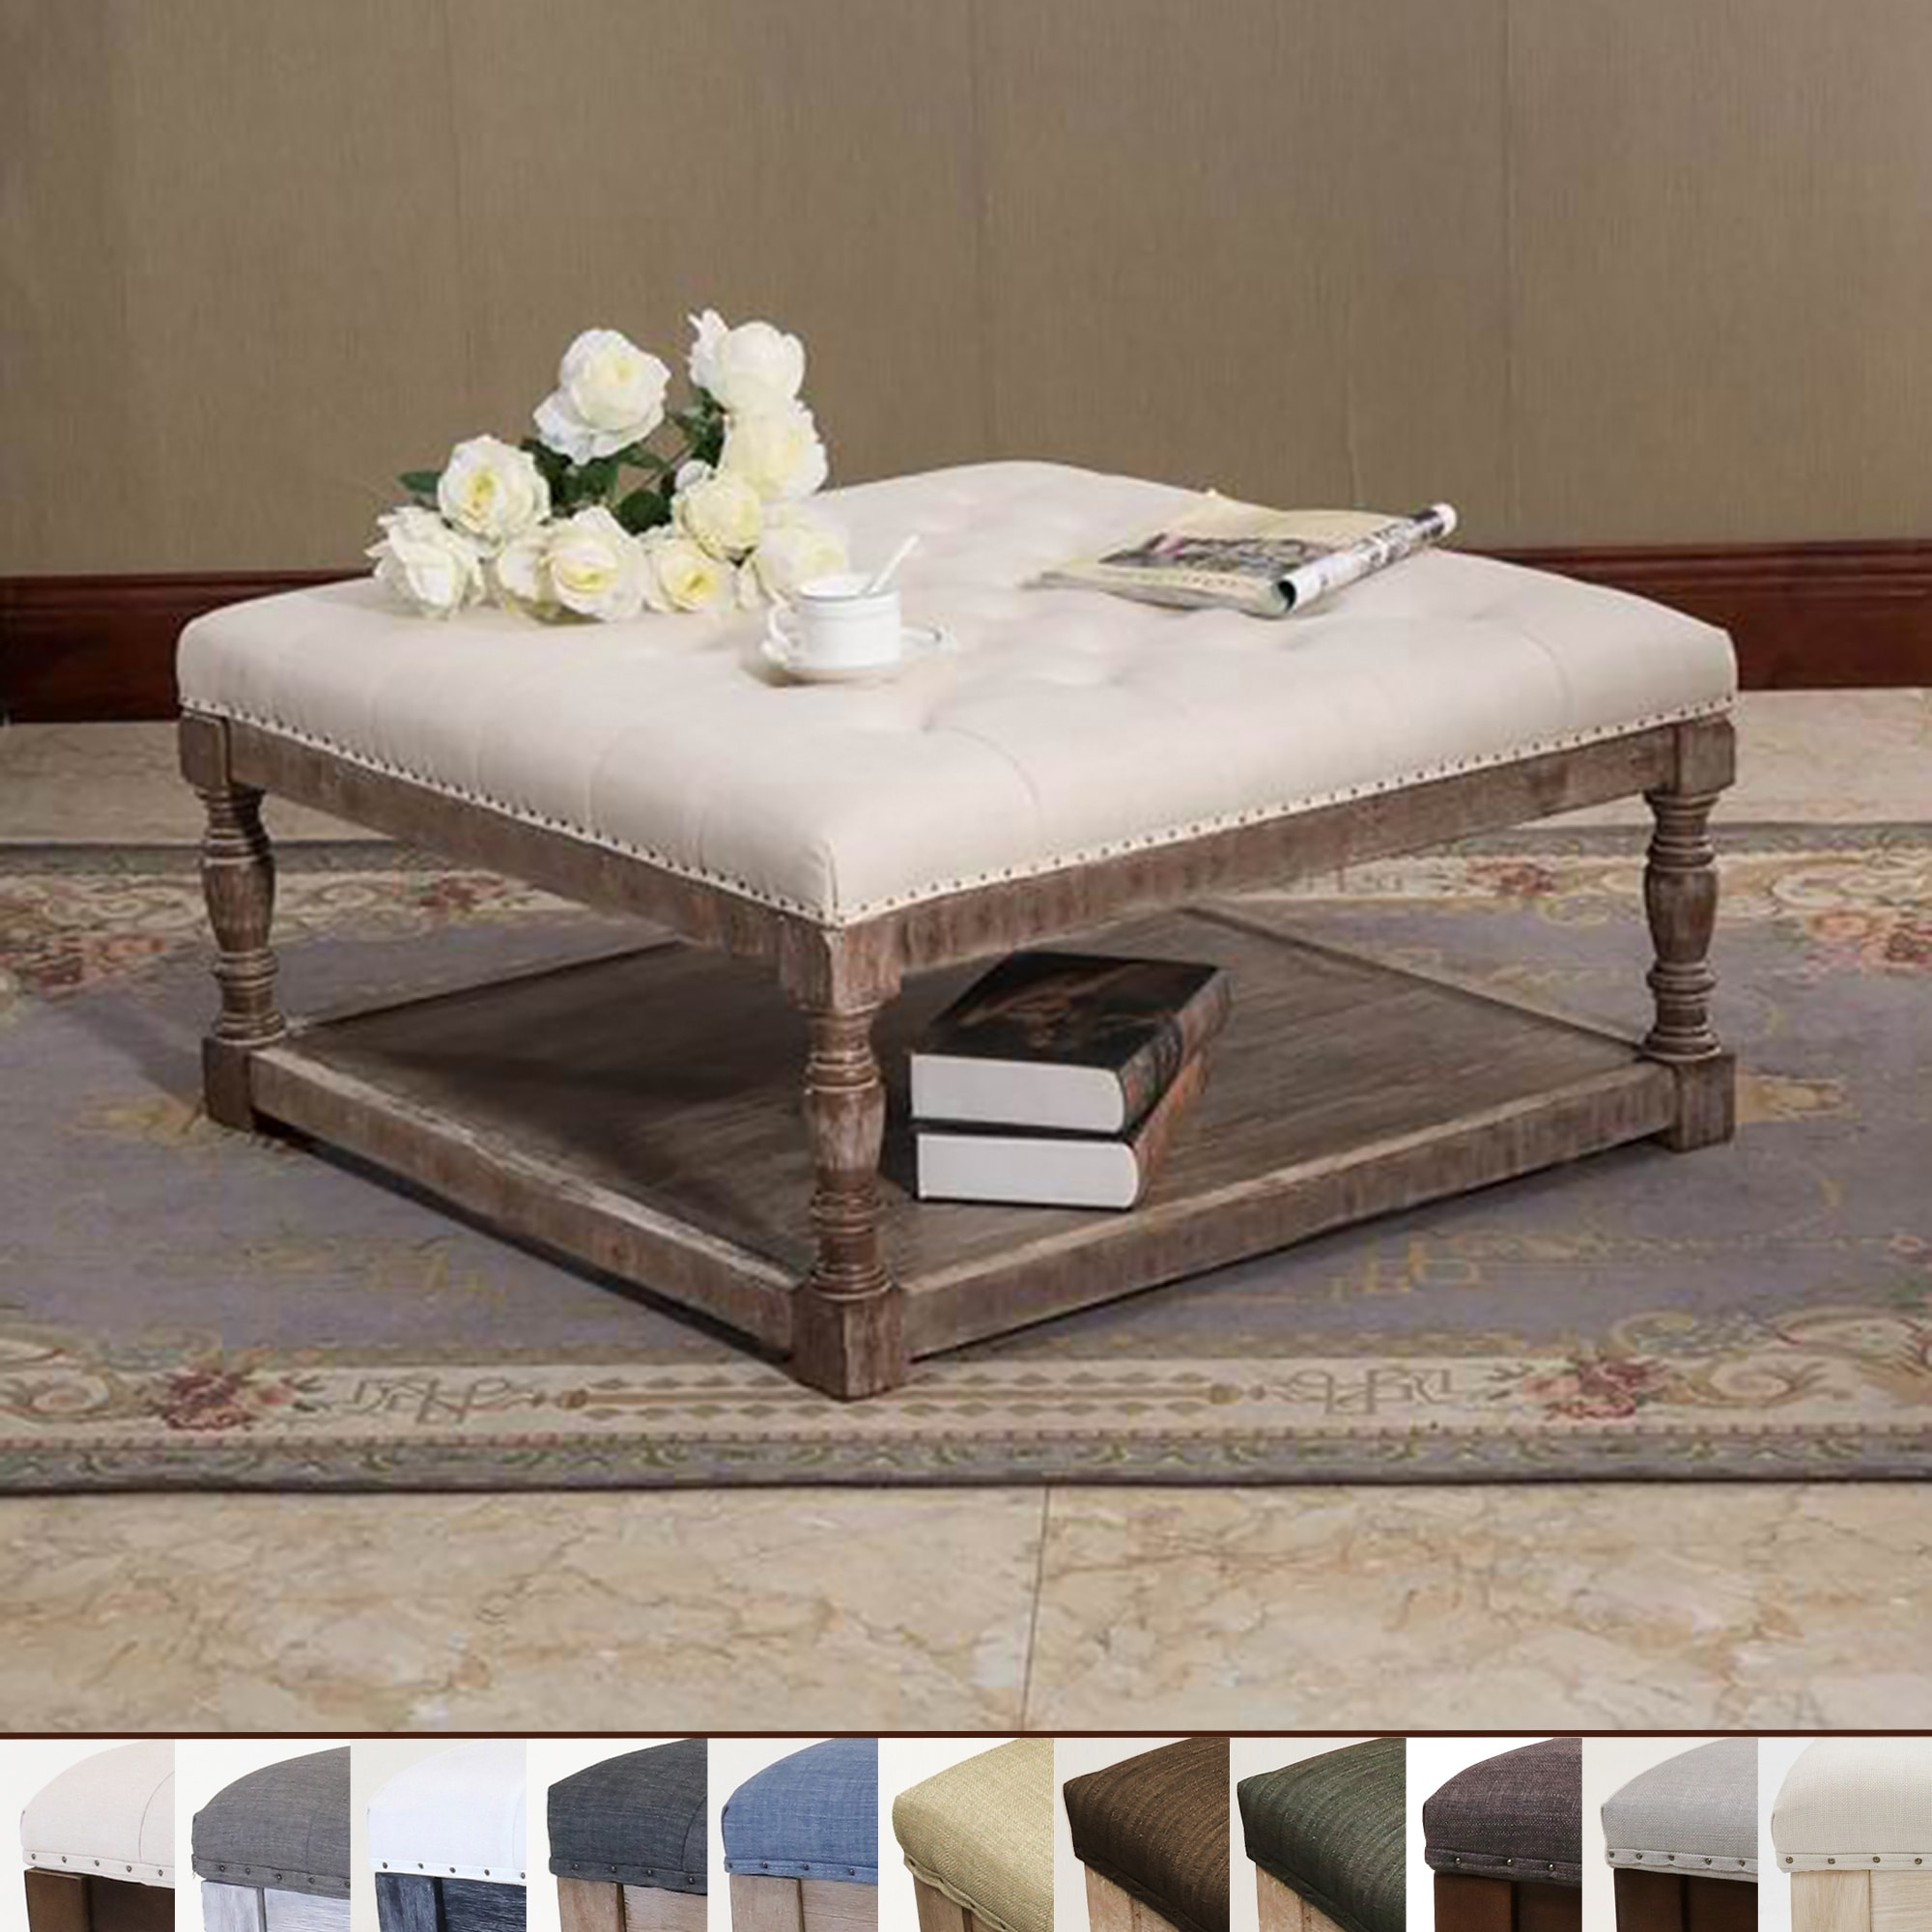 https://ak1.ostkcdn.com/images/products/is/images/direct/8658f7f701020b4a6ad3acbf76e49fcbdc3a2e86/Cairona-Tufted-Textile-34-inch-Shelved-Ottoman-Table.jpg